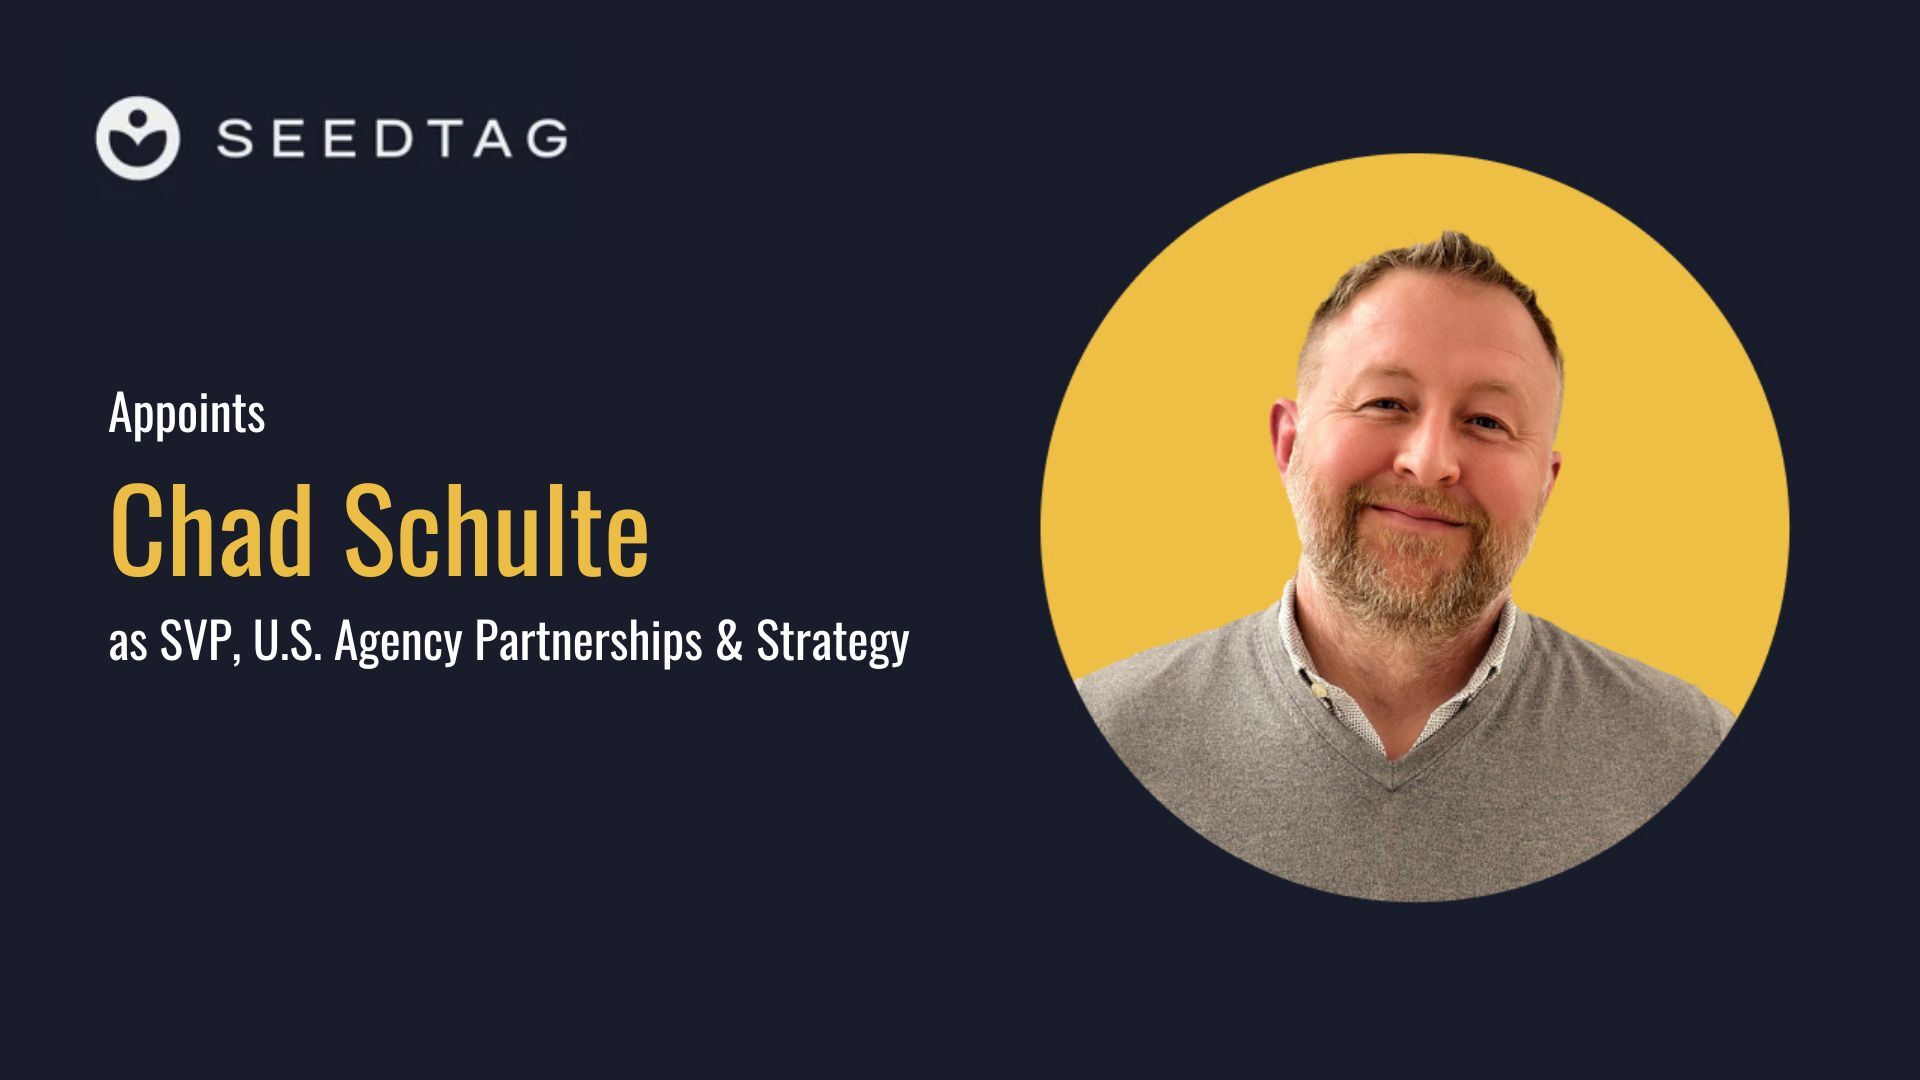 Seedtag Appoints Chad Schulte as SVP, U.S. Agency Partnerships & Strategy at Seedtag